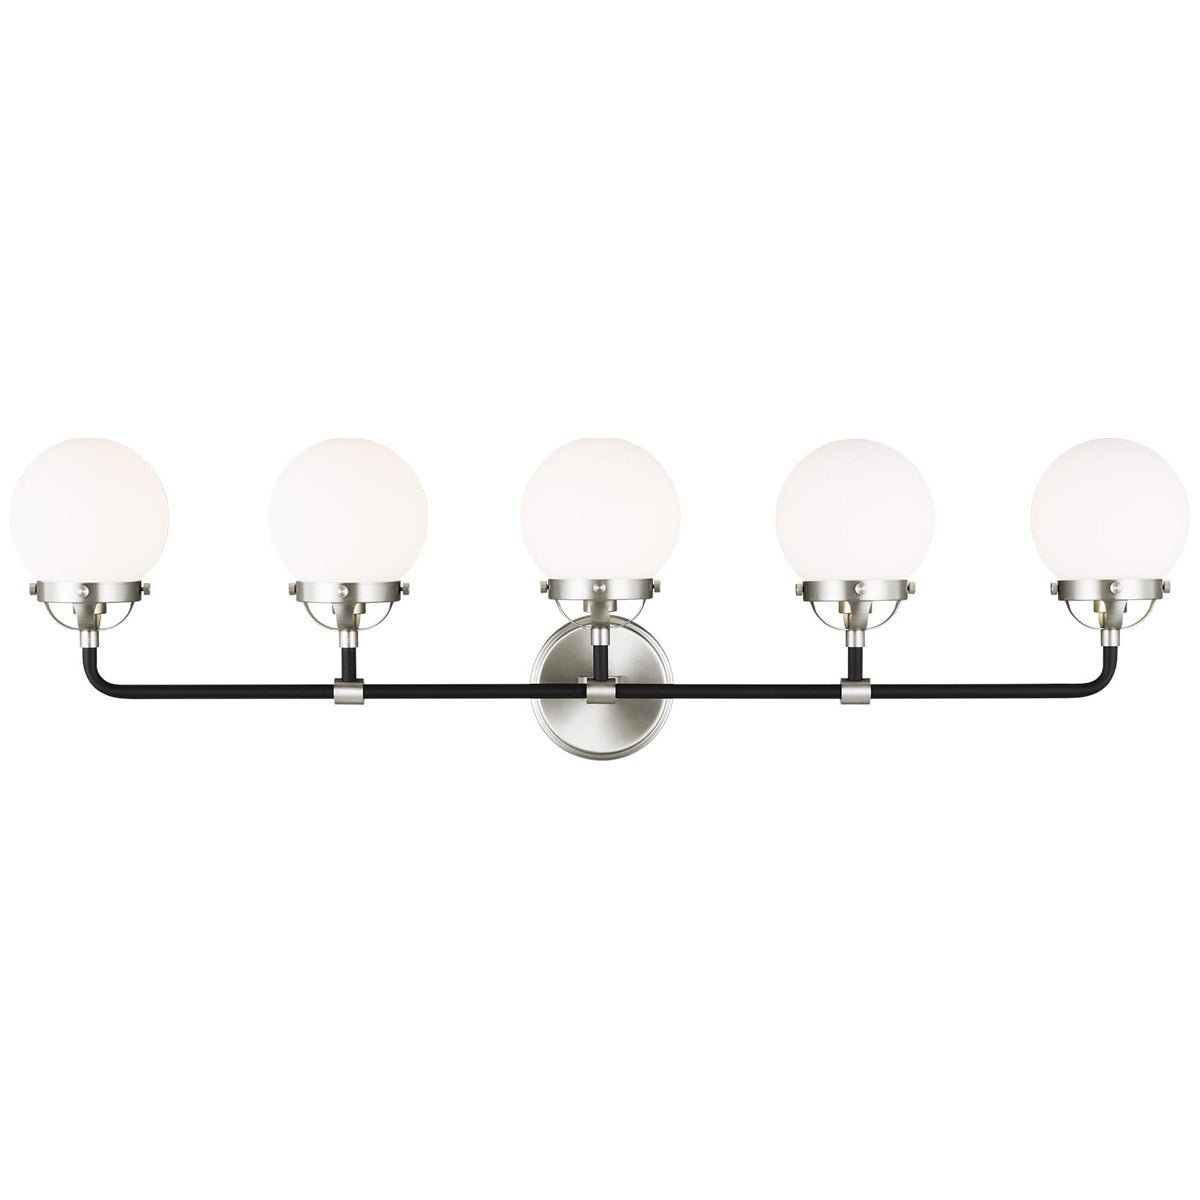 Sea Gull Lighting Cafe 5-Light Wall/Bath Sconce without Bulb